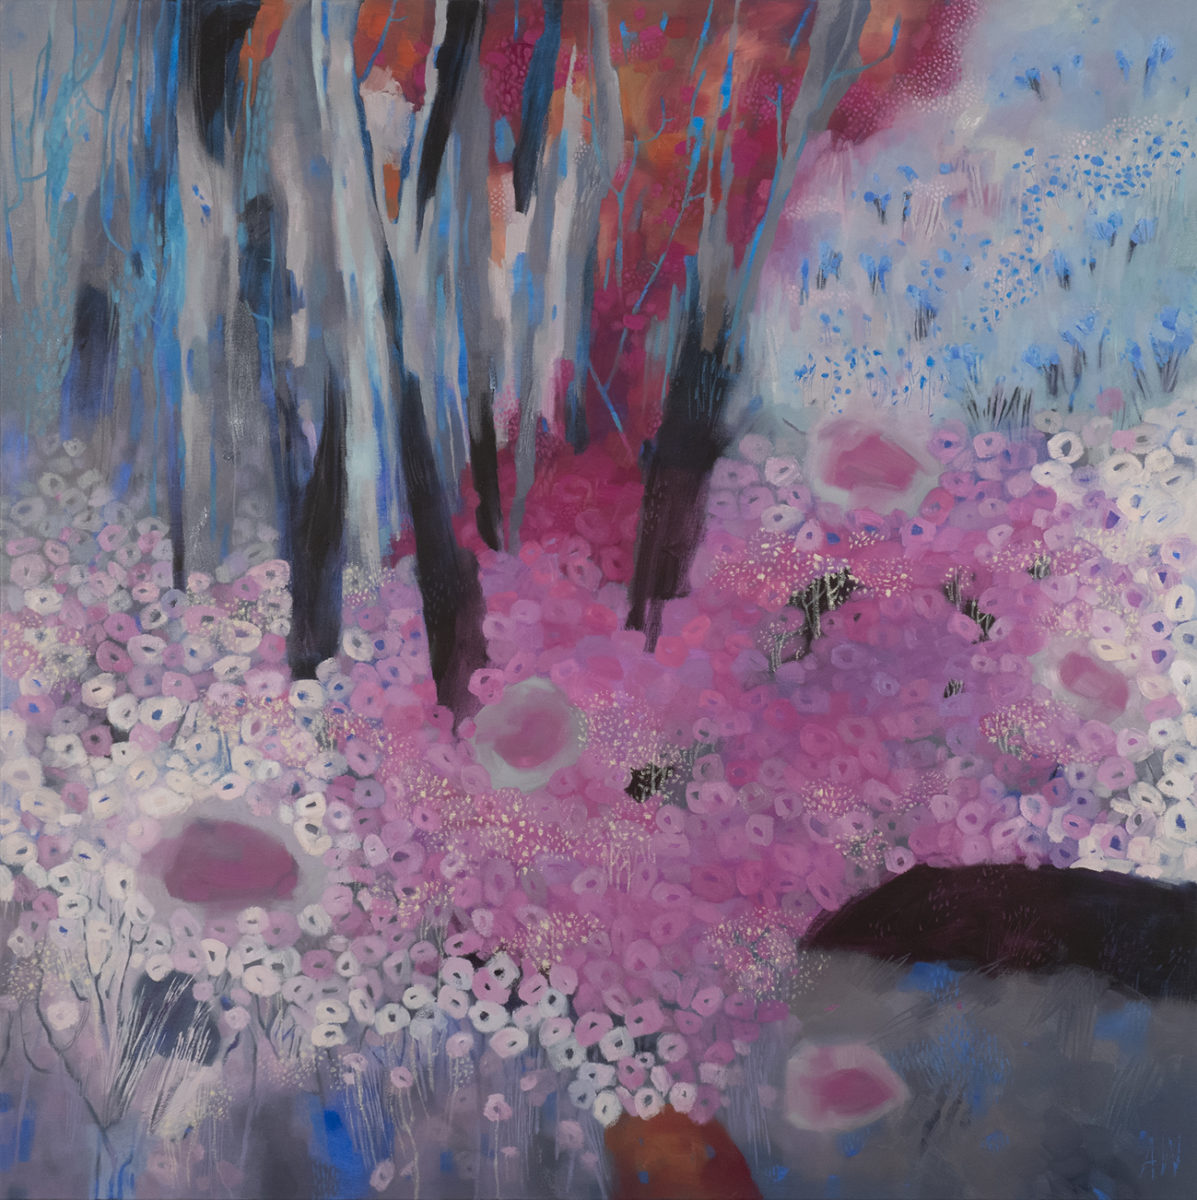 Paper daisies and pink sky puddles 2022 | Adrienne Williams | Oil on canvas | 100 x 100 cm | $3100